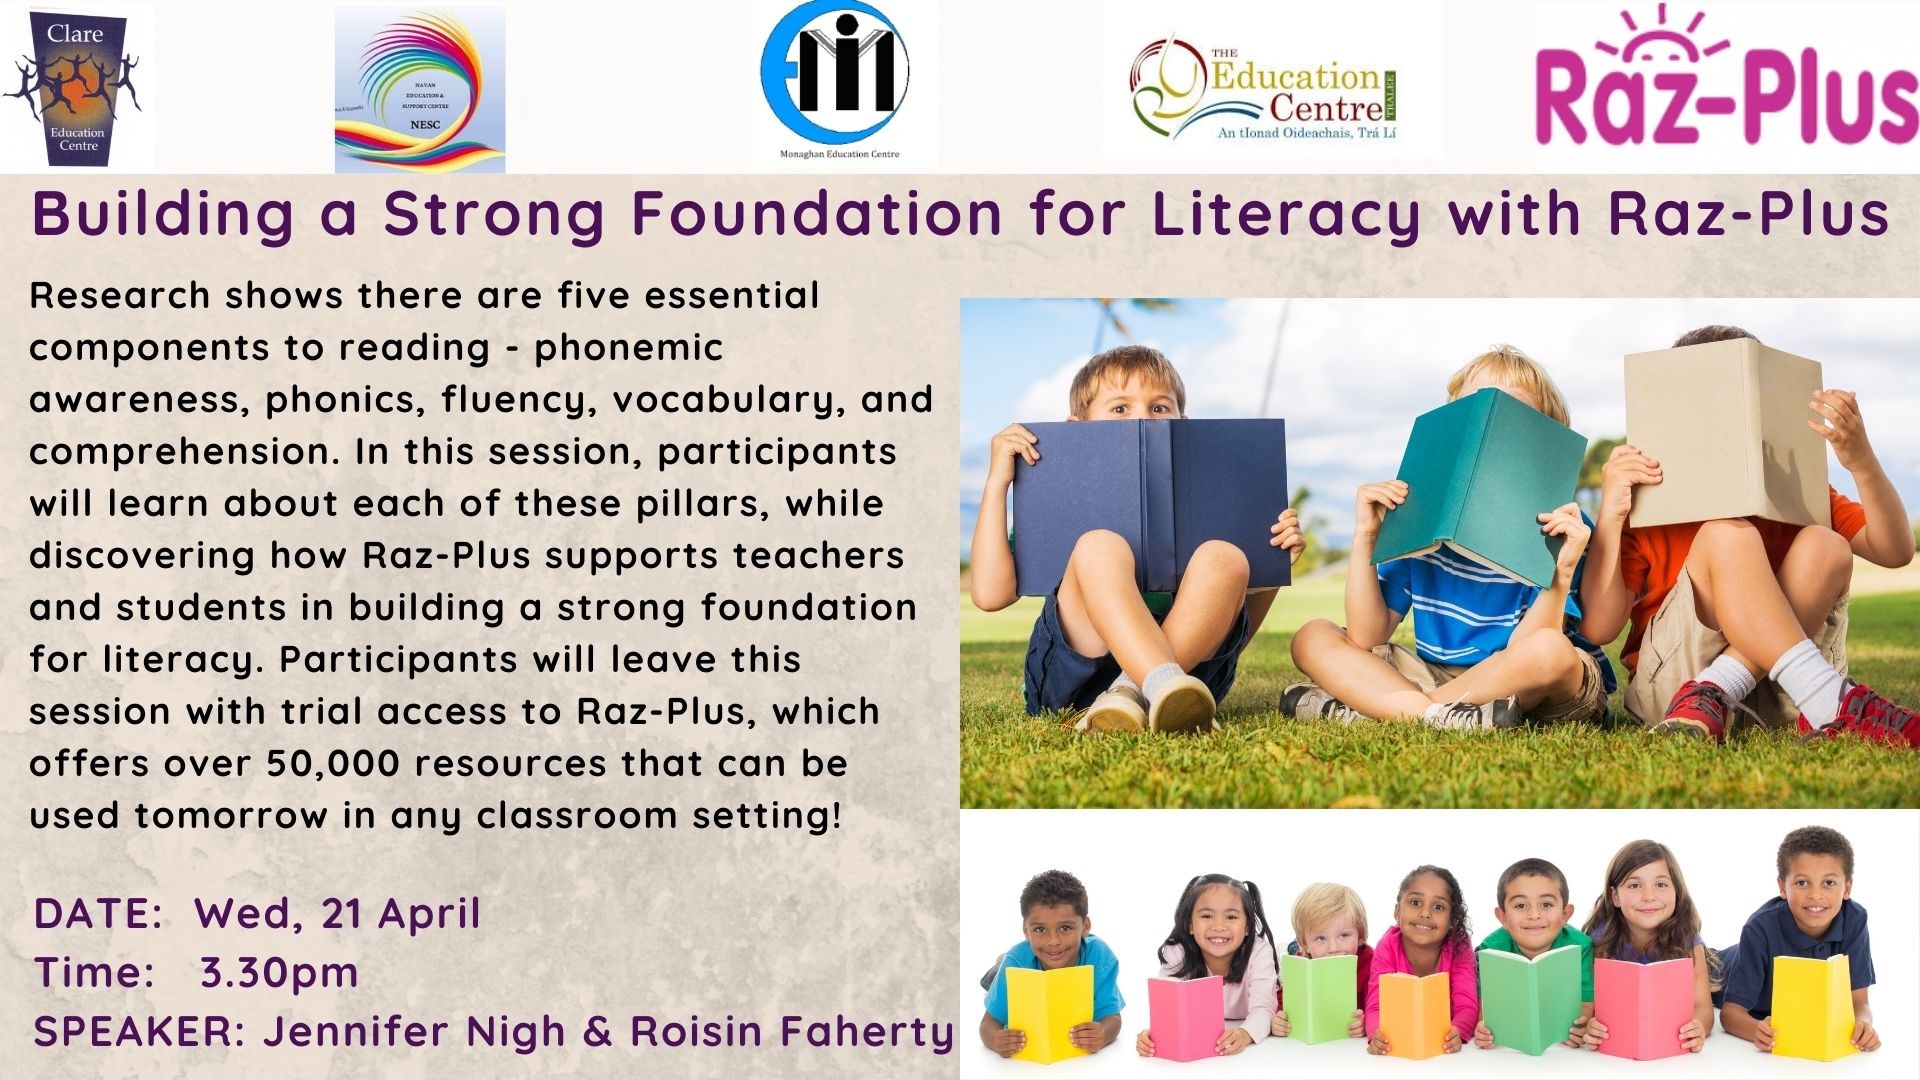 SP157-21 Building a Strong Foundation for Literacy with Raz-Plus 